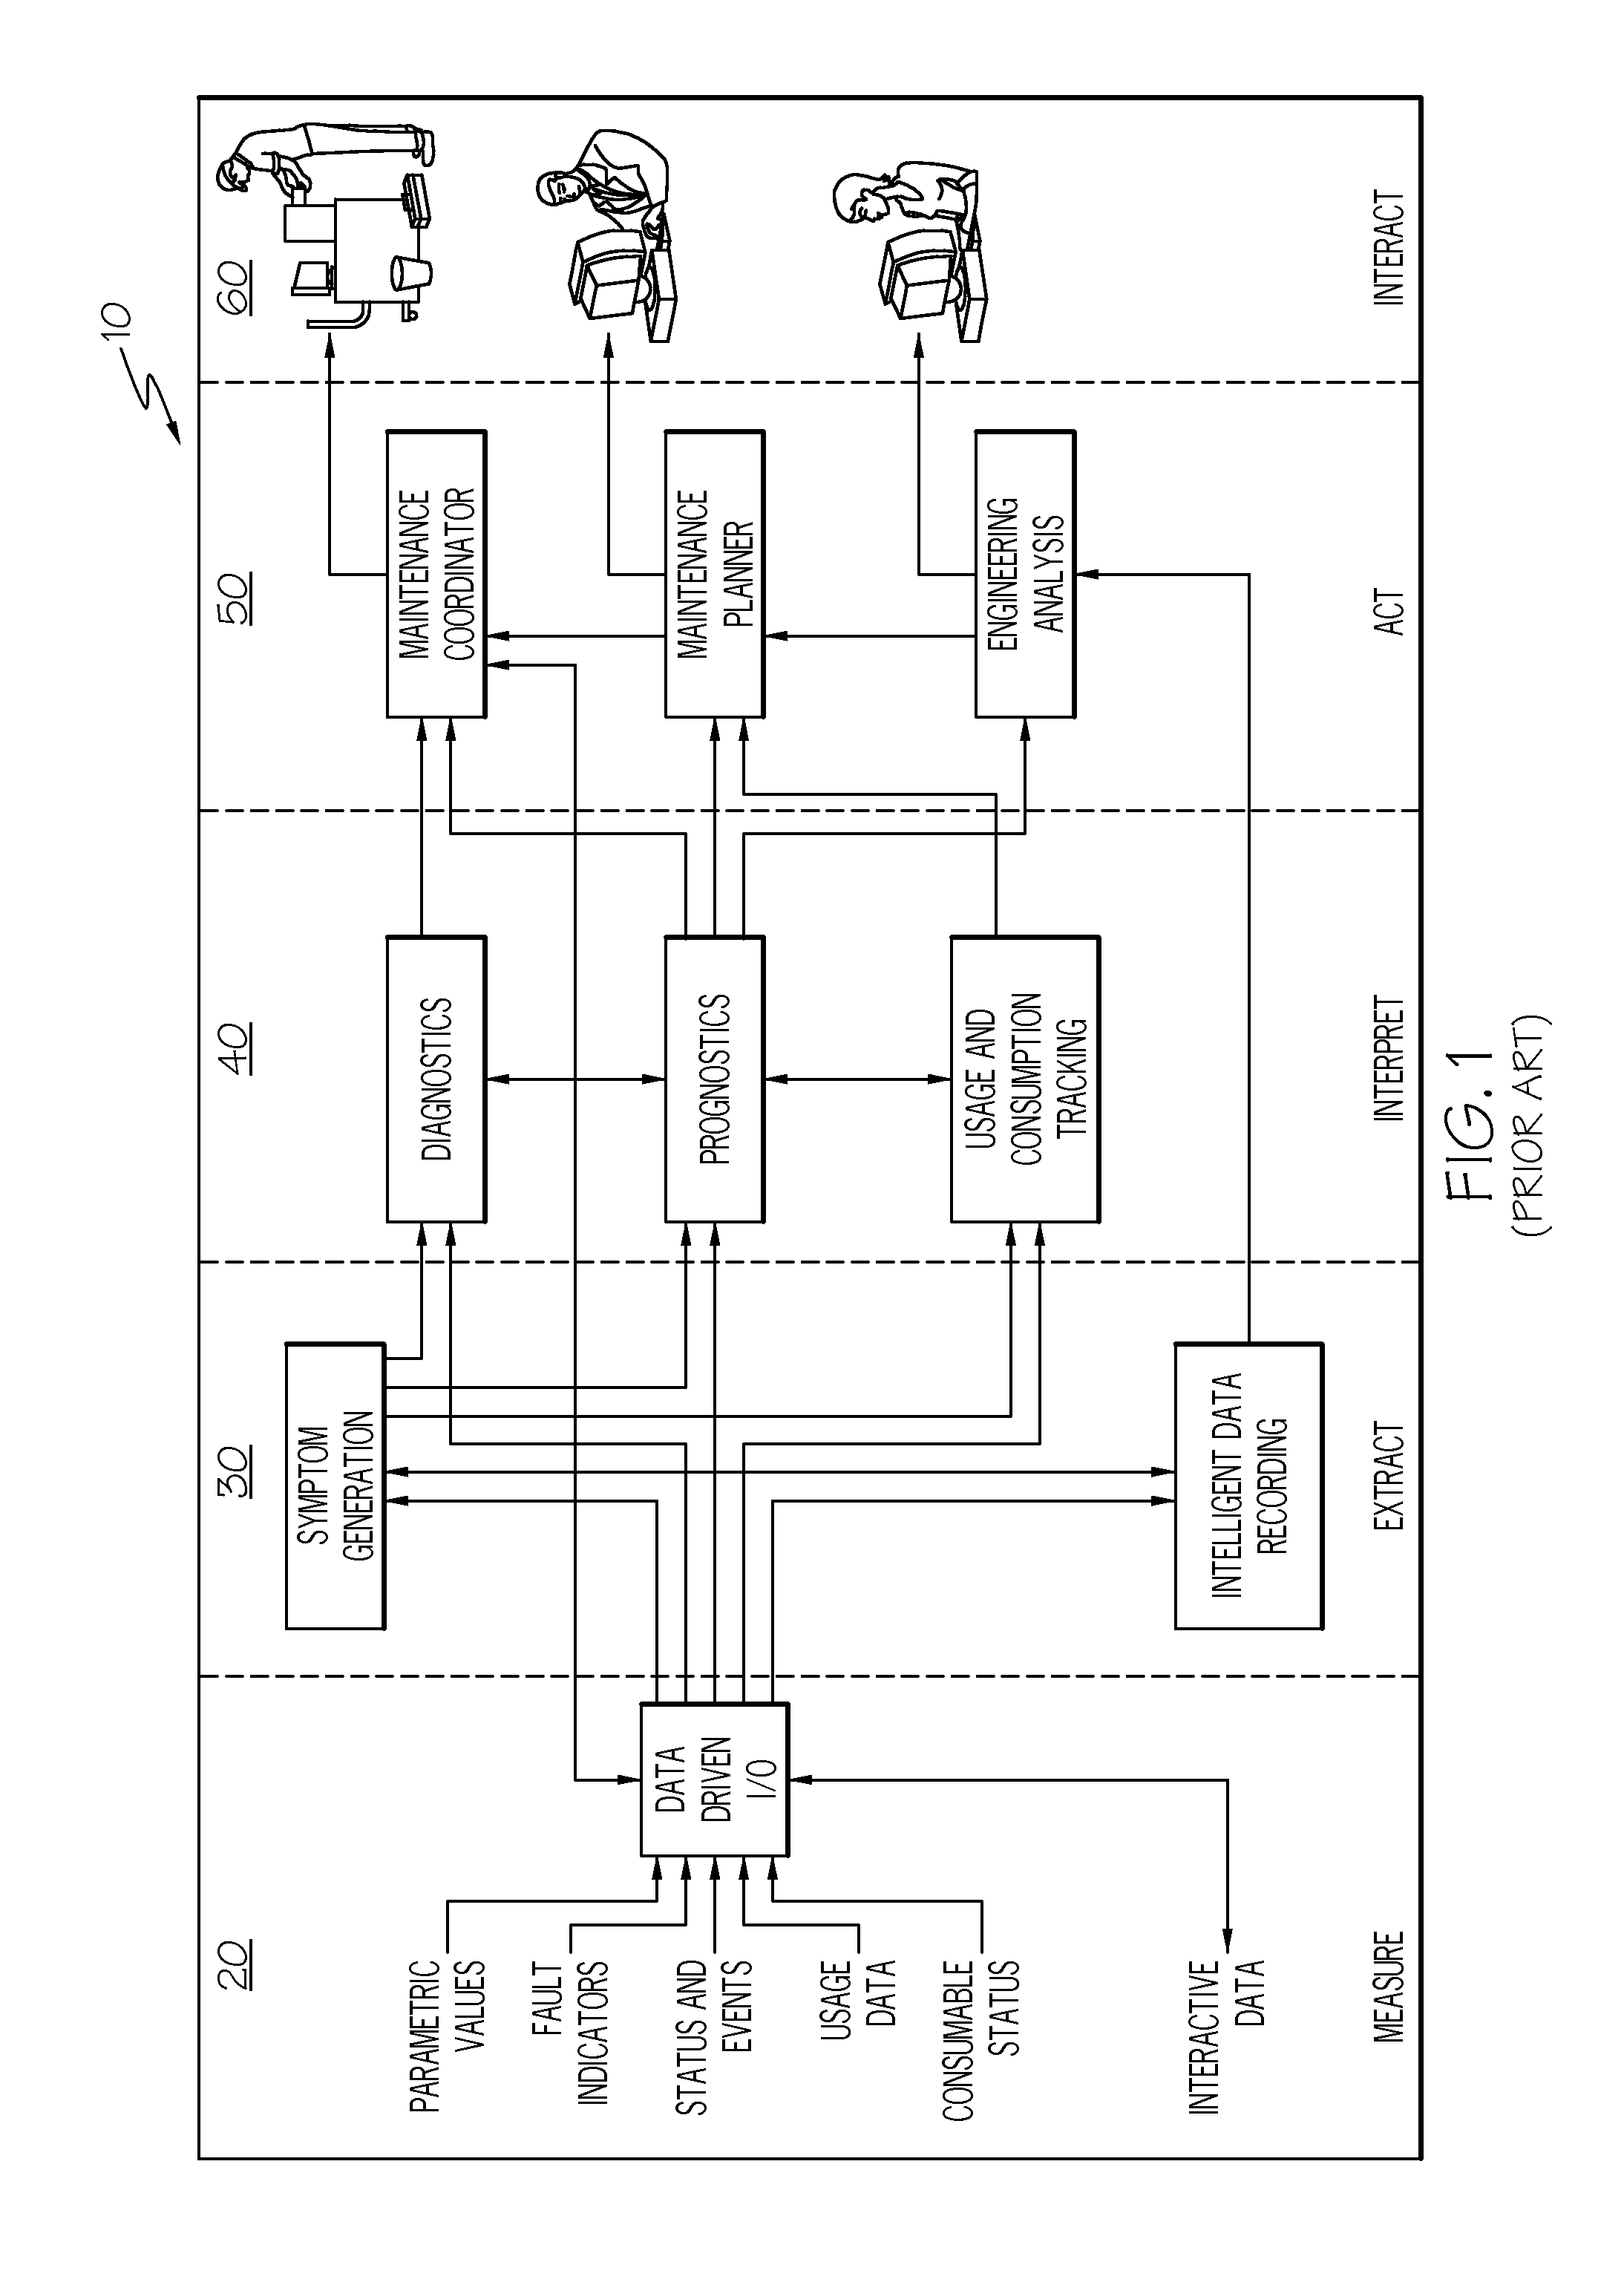 Systems and methods for augmenting the functionality of a monitoring node without recompiling